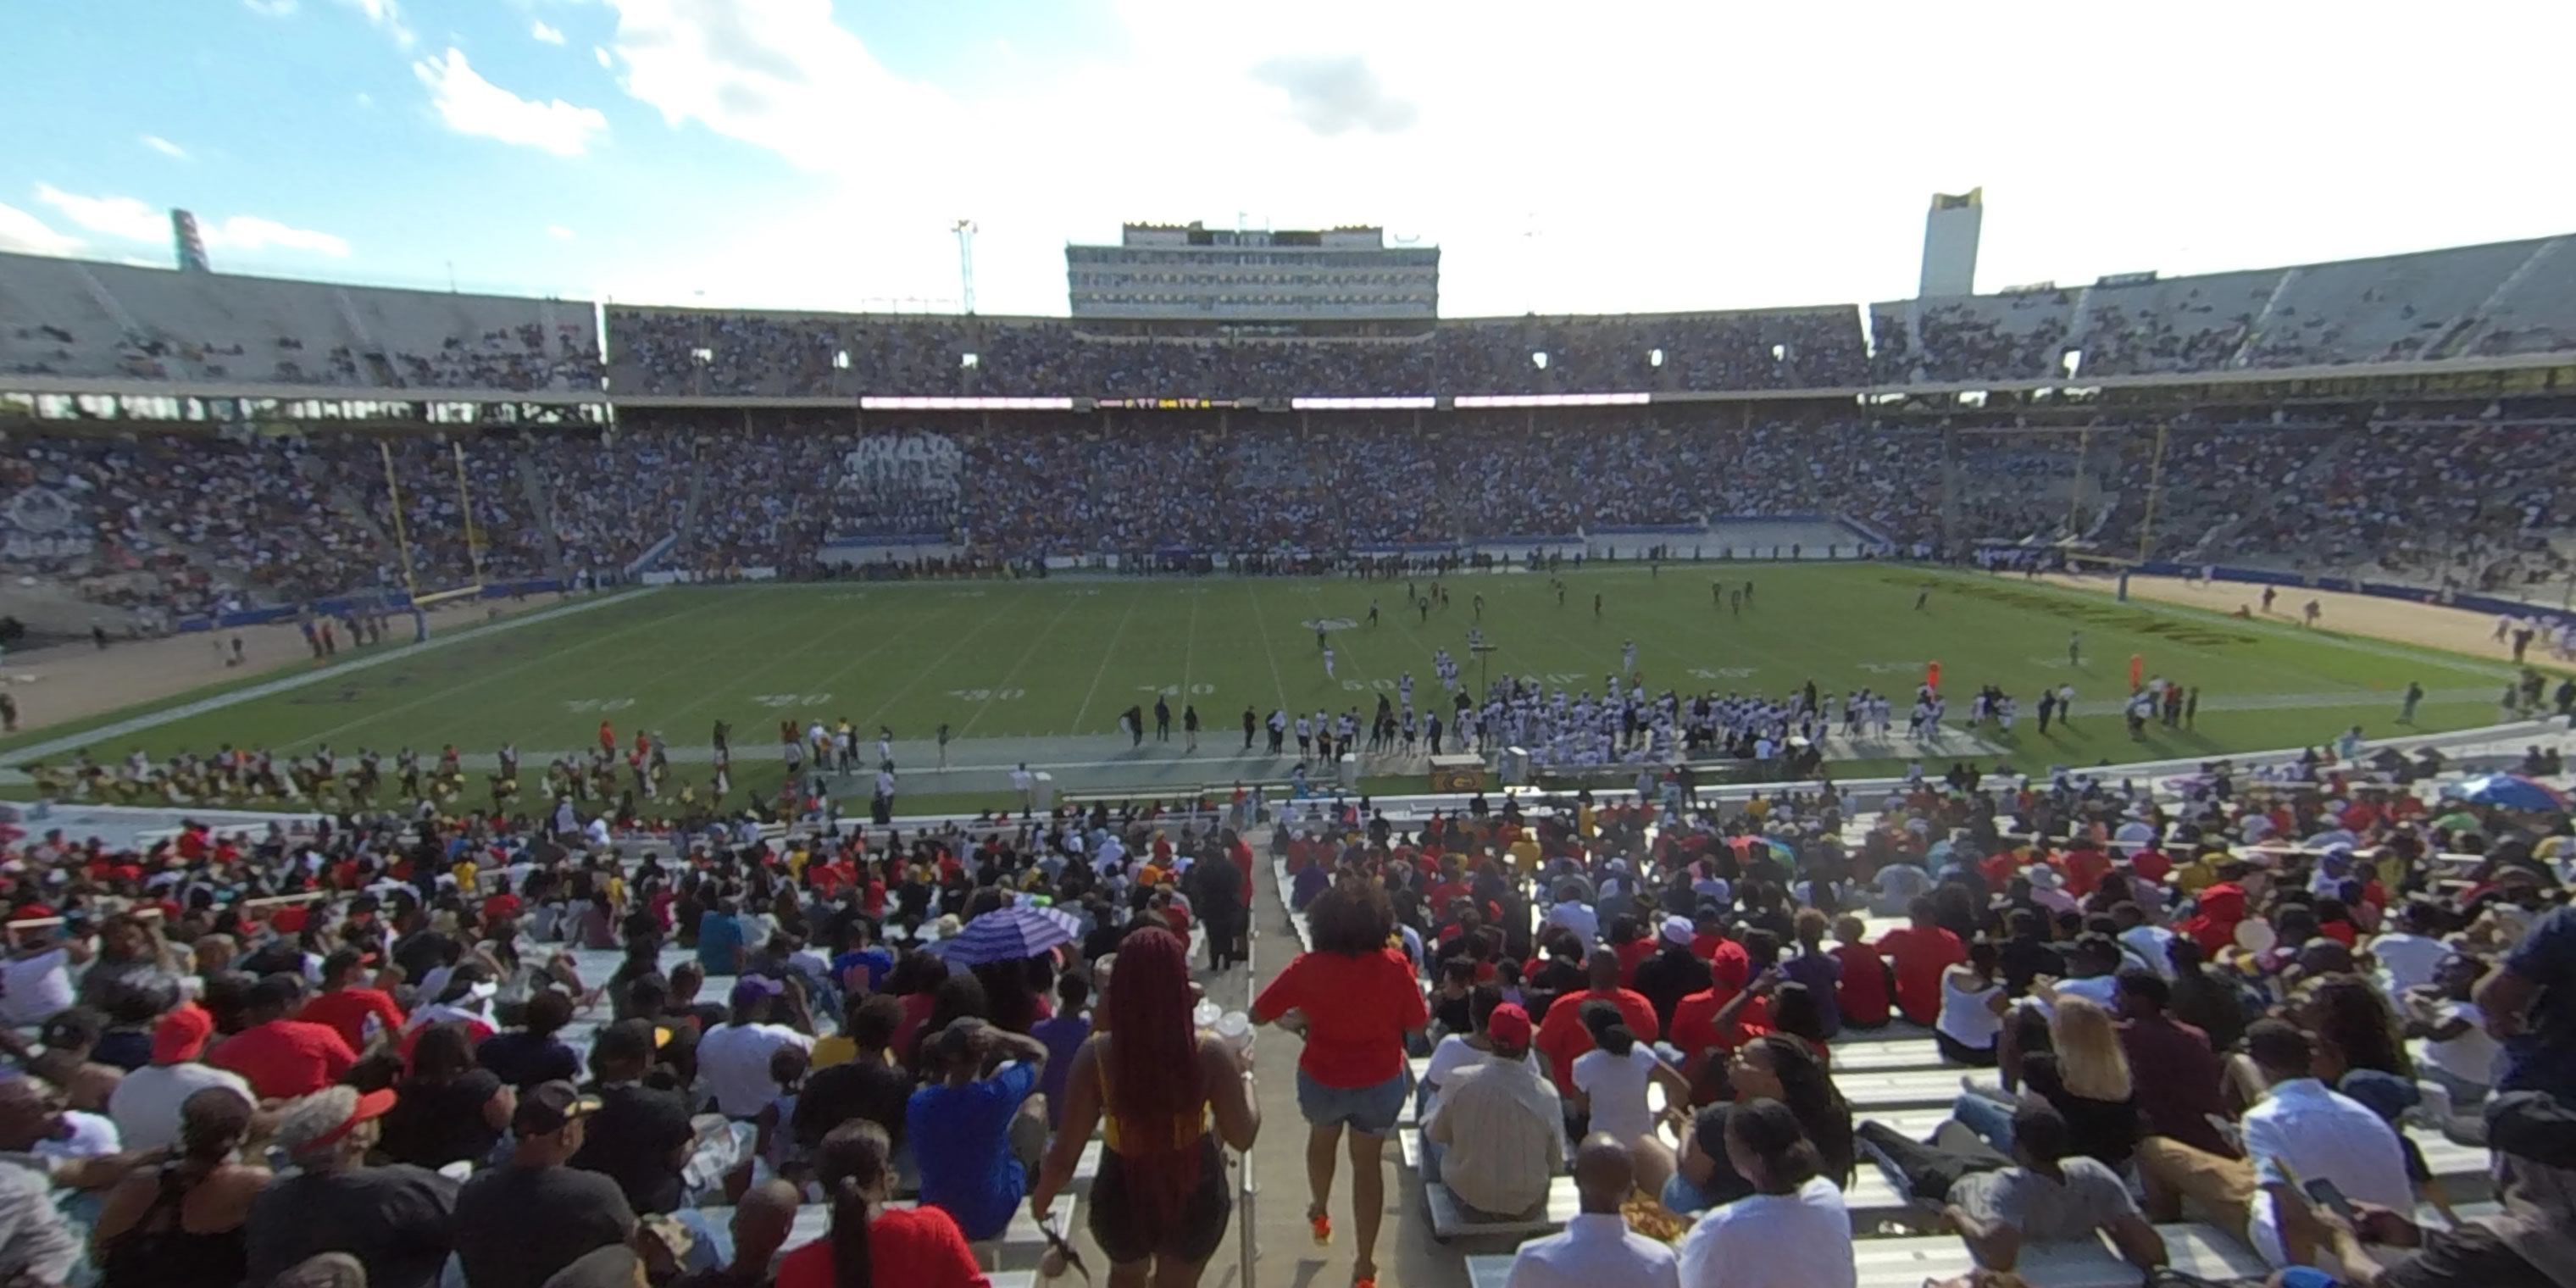 section 24 panoramic seat view  - cotton bowl